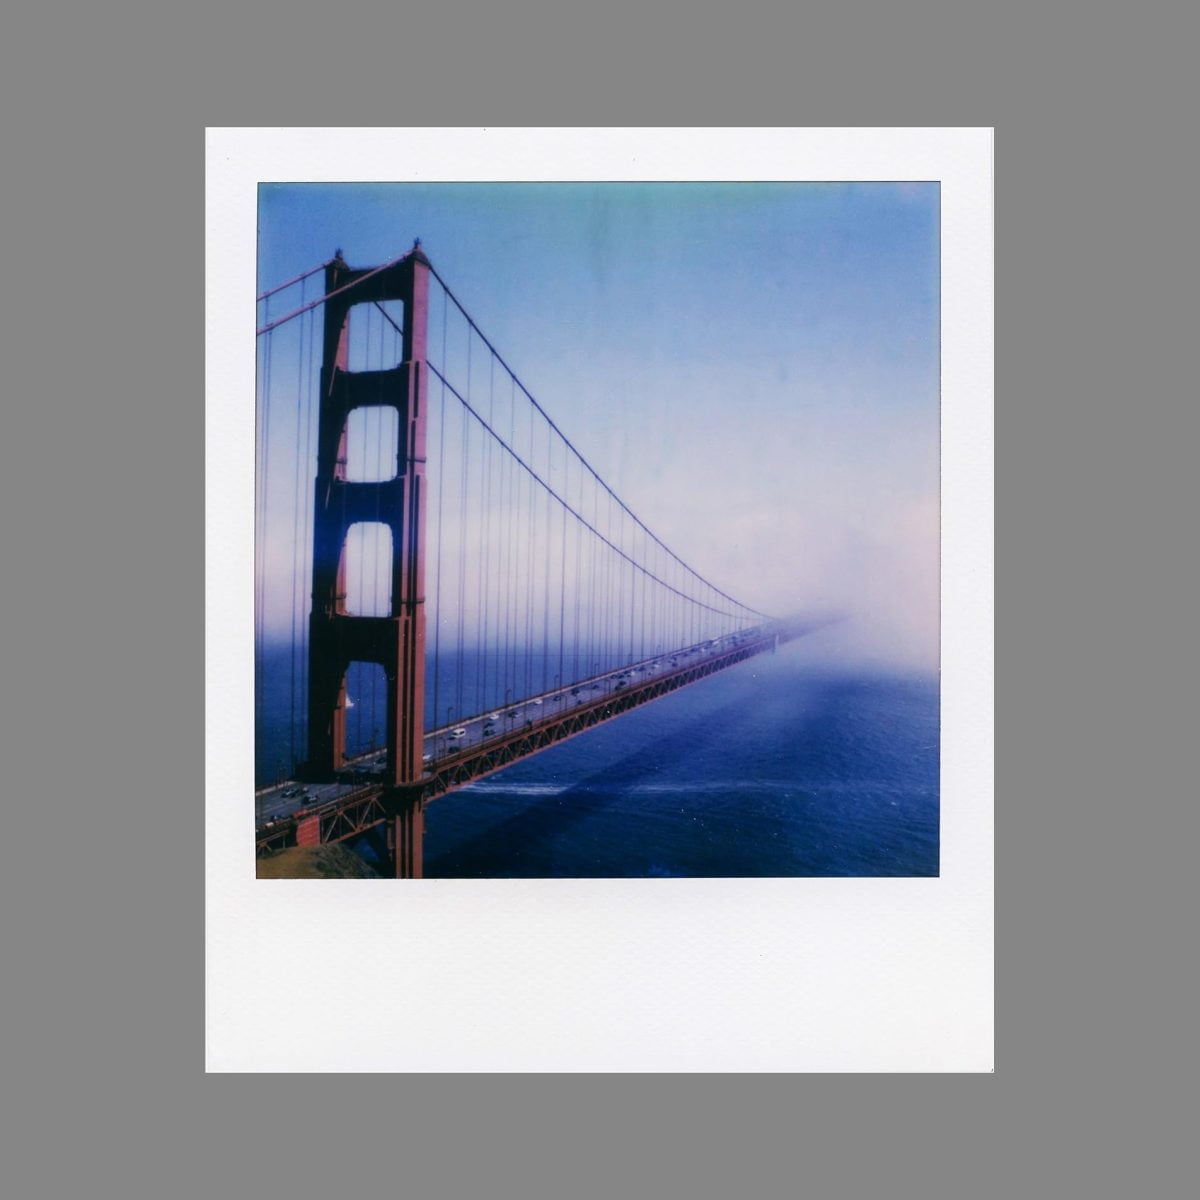 Frame 261 Polaroid &Lt;Section Data-Product-Standalone=&Quot;&Quot; Data-Product-Handle=&Quot;Color-Itype-Instant-Film&Quot; Data-Variant-Title=&Quot;&Quot; Data-Variant-Id=&Quot;31442153078902&Quot; Data-Section-Id=&Quot;Product&Quot; Data-Section-Type=&Quot;Product&Quot; Data-Enable-History-State=&Quot;True&Quot;&Gt; &Lt;Div Class=&Quot;Product Product-Theme--Color&Quot; Data-Js-Product-Id=&Quot;4416939393142&Quot;&Gt;&Lt;Form Class=&Quot;Product-Hero-Actions&Quot; Action=&Quot;Https://Eu.polaroid.com/Cart/Add&Quot; Enctype=&Quot;Multipart/Form-Data&Quot; Method=&Quot;Post&Quot;&Gt; &Lt;Div Class=&Quot;Product-Item Max-Wrapper&Quot;&Gt; &Lt;Div Class=&Quot;Product__Detail&Quot;&Gt; &Lt;Div Class=&Quot;Product-Details&Quot;&Gt; &Lt;Div Class=&Quot;Product-Details__Description&Quot;&Gt; &Lt;Div Class=&Quot;Product-Details__Description--First&Quot;&Gt; &Lt;Ul Class=&Quot;A-Unordered-List A-Vertical A-Spacing-Mini&Quot;&Gt; &Lt;Li Class=&Quot;A-Spacing-Mini&Quot;&Gt;&Lt;Span Class=&Quot;A-List-Item&Quot;&Gt;Updated Classic: The Classic Film Is Back With A New Formula Exclusively For I-Type Cameras. It Uses Polaroid'S Latest Chemistry To Provide Richer Colors, Tones, And Contrasts. I-Type Film Is Not Compatible With Vintage Polaroid Cameras.&Lt;/Span&Gt;&Lt;/Li&Gt; &Lt;Li Class=&Quot;A-Spacing-Mini&Quot;&Gt;&Lt;Span Class=&Quot;A-List-Item&Quot;&Gt;Light It Up: Polaroid Instant Film Loves Light. The More Light In Your Shot, The Better Your Photo Will Turn Out. Always Shoot In Bright Light Or Use The Camera Flash.&Lt;/Span&Gt;&Lt;/Li&Gt; &Lt;Li Class=&Quot;A-Spacing-Mini&Quot;&Gt;&Lt;Span Class=&Quot;A-List-Item&Quot;&Gt;Develop: All Photos Appear Blank At First. Photos Develop Within 15 Minutes. Shield Photos From The Light And Place Them Face Down As They Develop.&Lt;/Span&Gt;&Lt;/Li&Gt; &Lt;Li Class=&Quot;A-Spacing-Mini&Quot;&Gt;&Lt;Span Class=&Quot;A-List-Item&Quot;&Gt;Create: Every Photo You Create Is Rich Textured And Unique. Unpredictable, Imperfect, And Impossible To Reproduce.&Lt;/Span&Gt;&Lt;/Li&Gt; &Lt;Li Class=&Quot;A-Spacing-Mini&Quot;&Gt;&Lt;Span Class=&Quot;A-List-Item&Quot;&Gt;Store Chilled: Temperature Affects How The Film Works So Keep It Stored Chilled In The Fridge, Do Not Freeze.&Lt;/Span&Gt;&Lt;/Li&Gt; &Lt;/Ul&Gt; &Lt;/Div&Gt; &Lt;/Div&Gt; &Lt;/Div&Gt; &Lt;/Div&Gt; &Lt;/Div&Gt; &Lt;/Form&Gt;&Lt;/Div&Gt; &Lt;/Section&Gt; Polaroid Color Film For I-Type Polaroid Color Film For I-Type